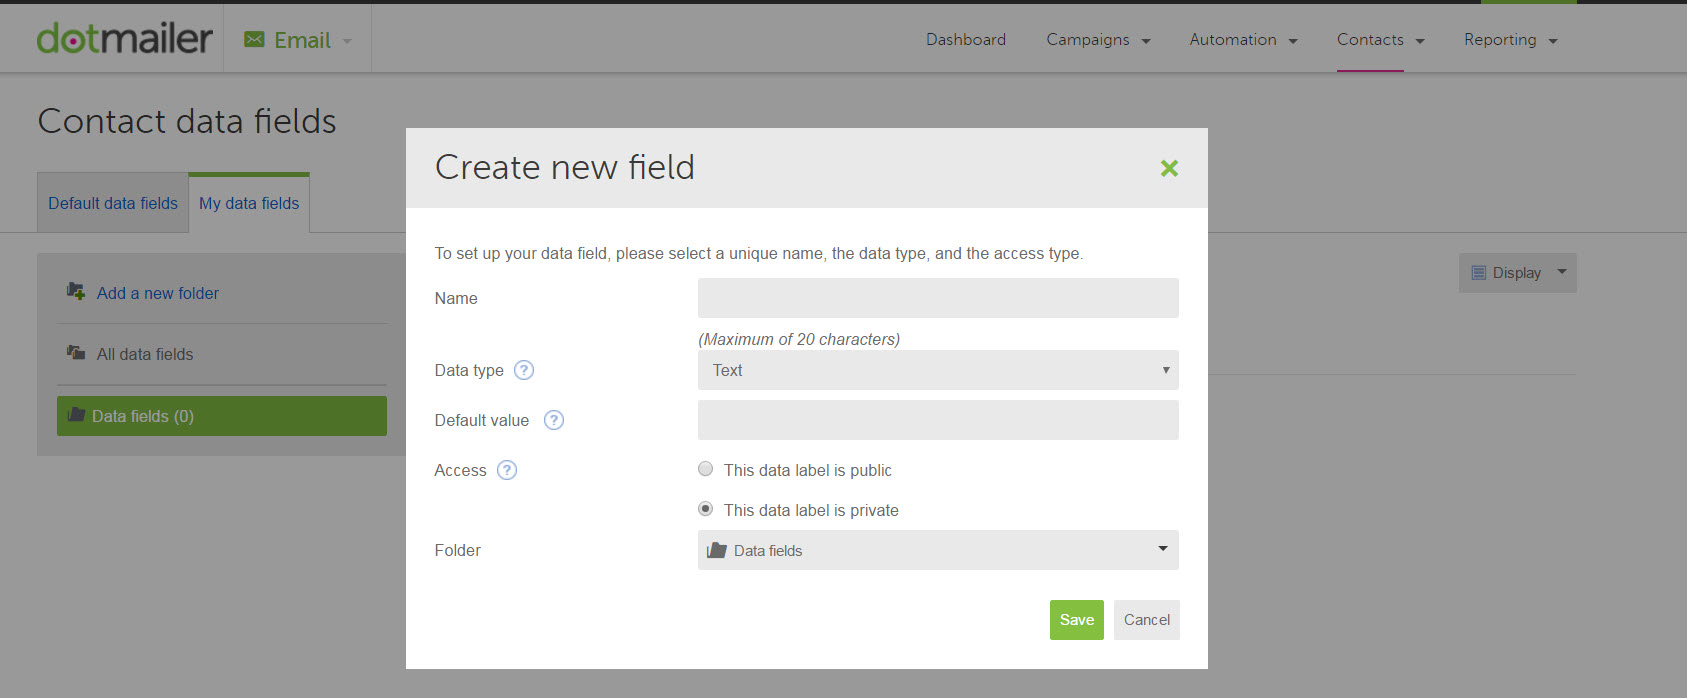 Create a new data field in the dialog box